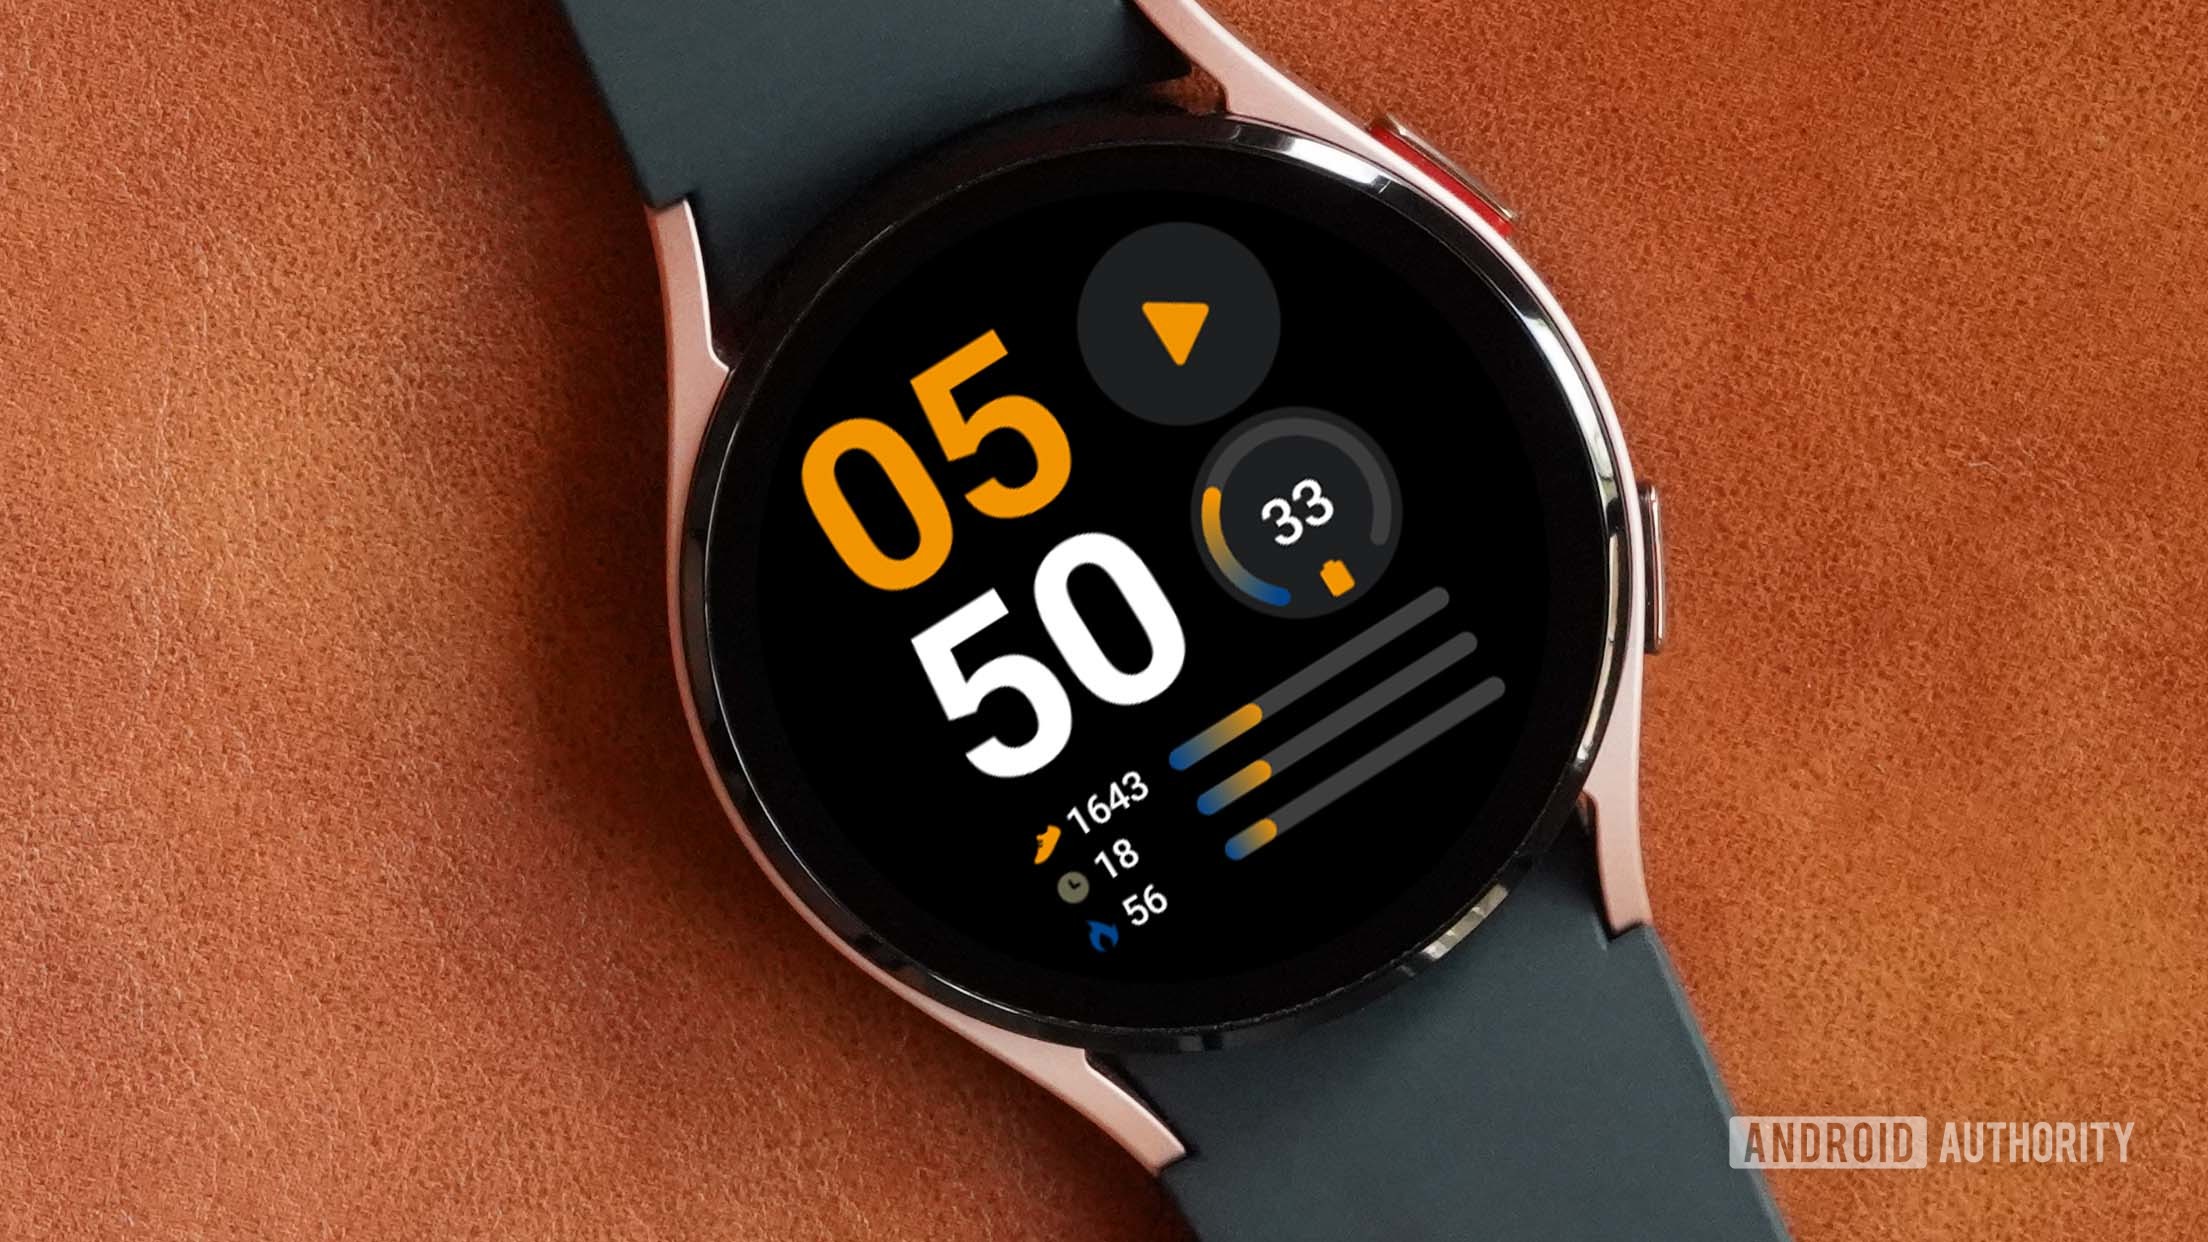 A Samsung Galaxy Watch 4 on a leather surface displays the Info Brick watch face.